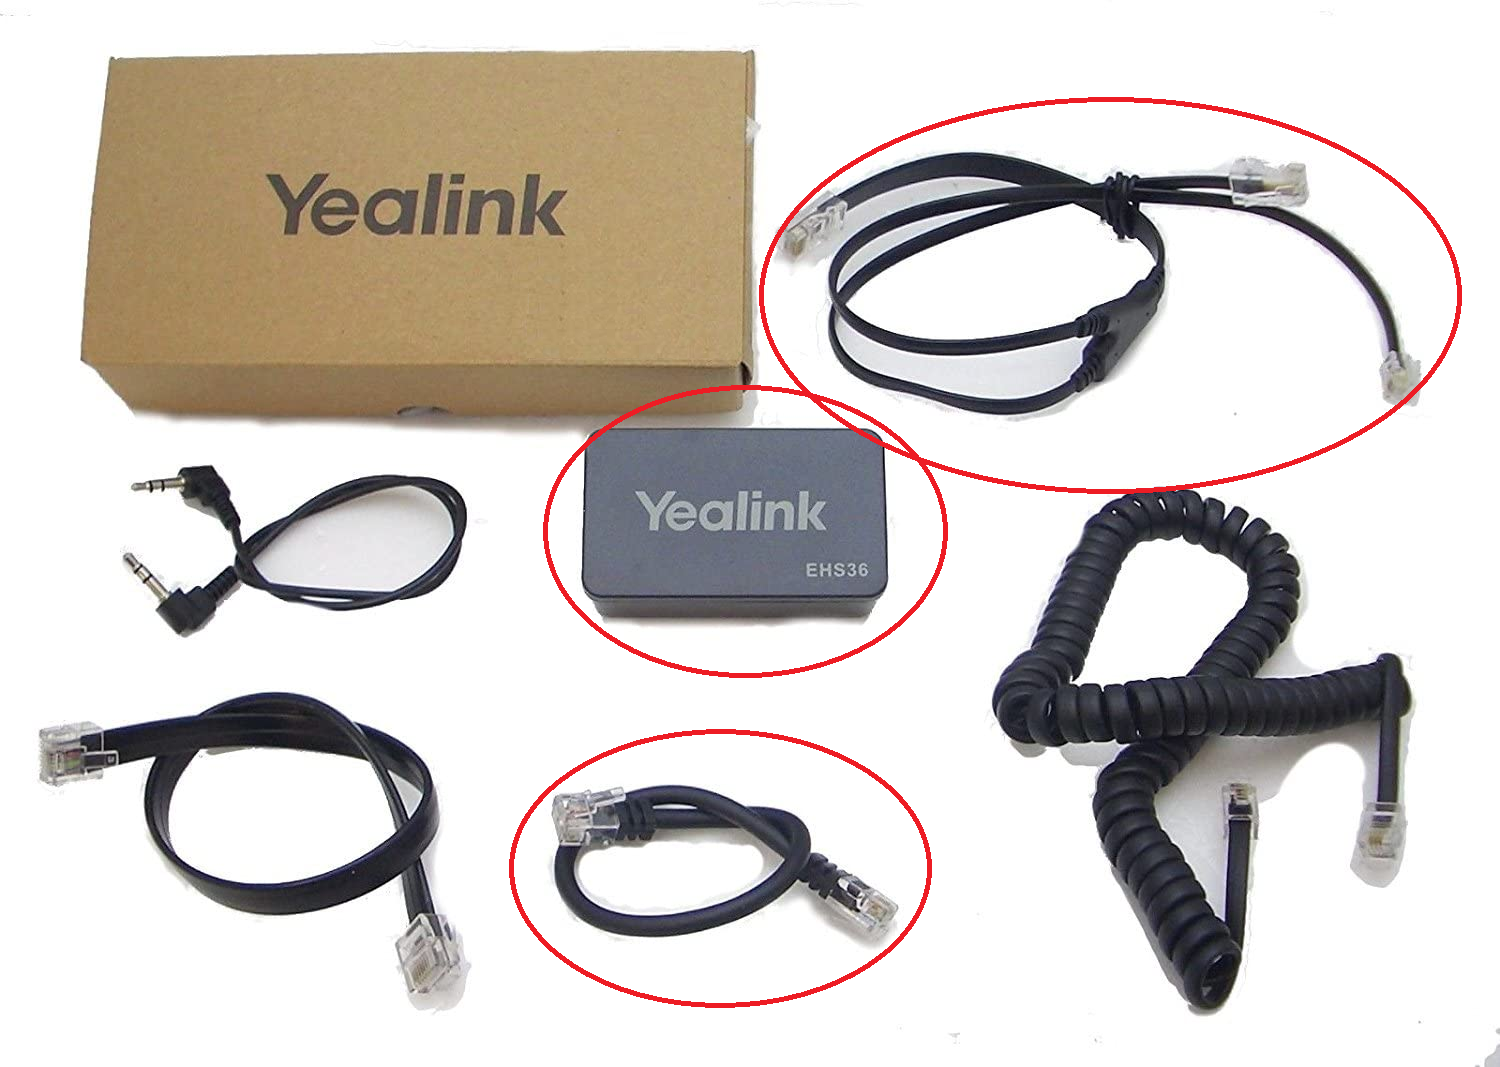 Yealink EHS36 cords and adapter box for Sennheiser